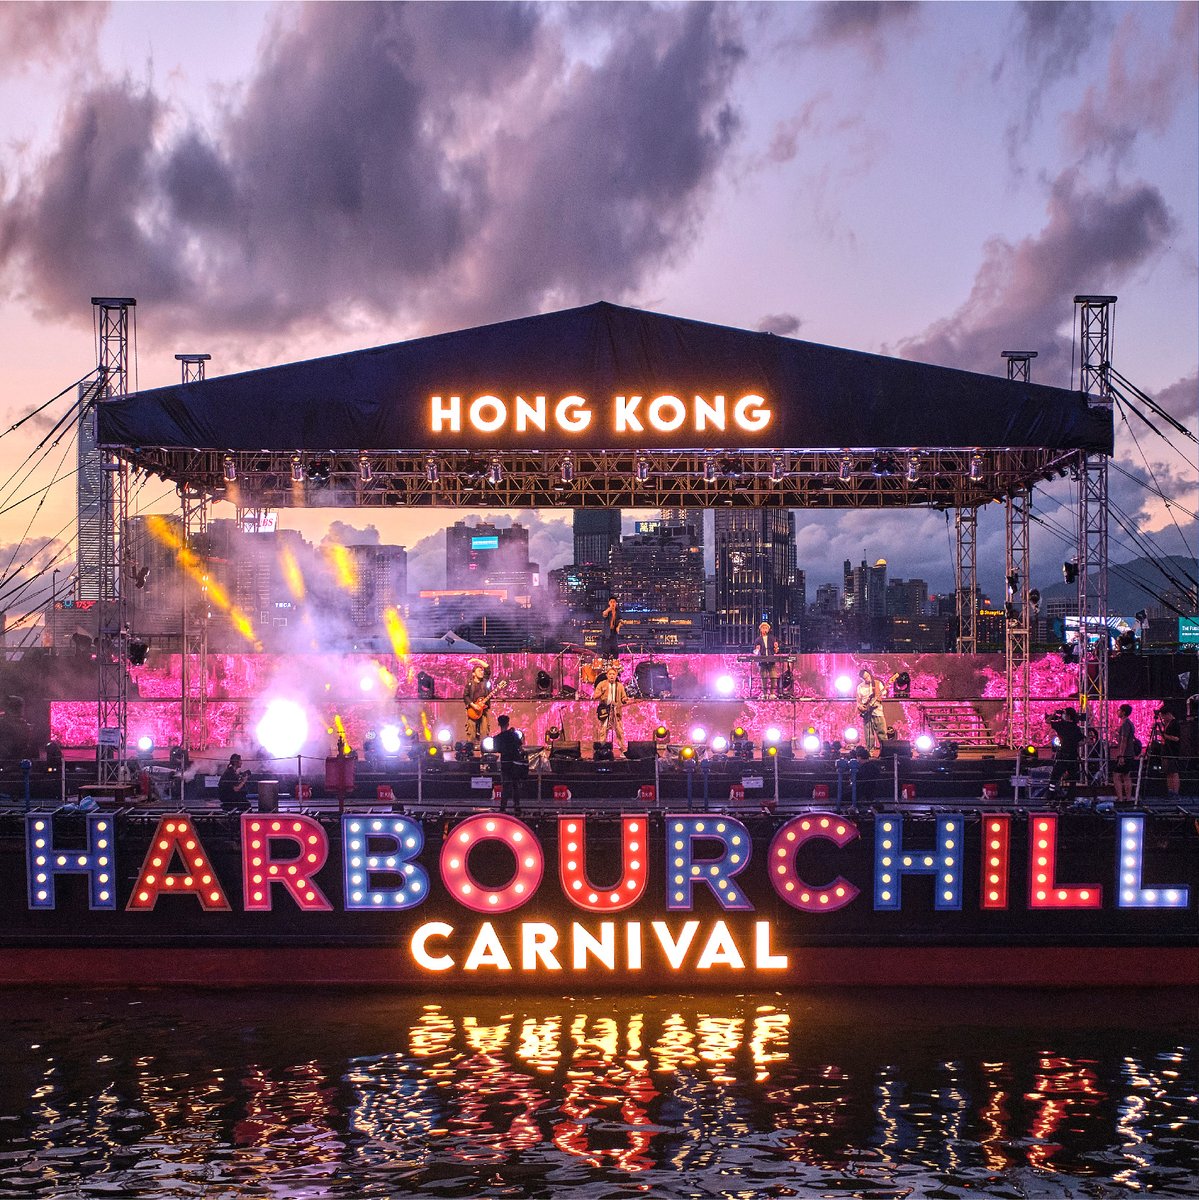 The Harbour Chill Carnival is in full swing!🥳 Victoria Harbour has come alive with special pyrotechnic displays🎇 and music shows on a water stage featuring superstars like Kelly Chen, and electrifying performances by skateboarders, breakdancers, and entertainers worldwide.